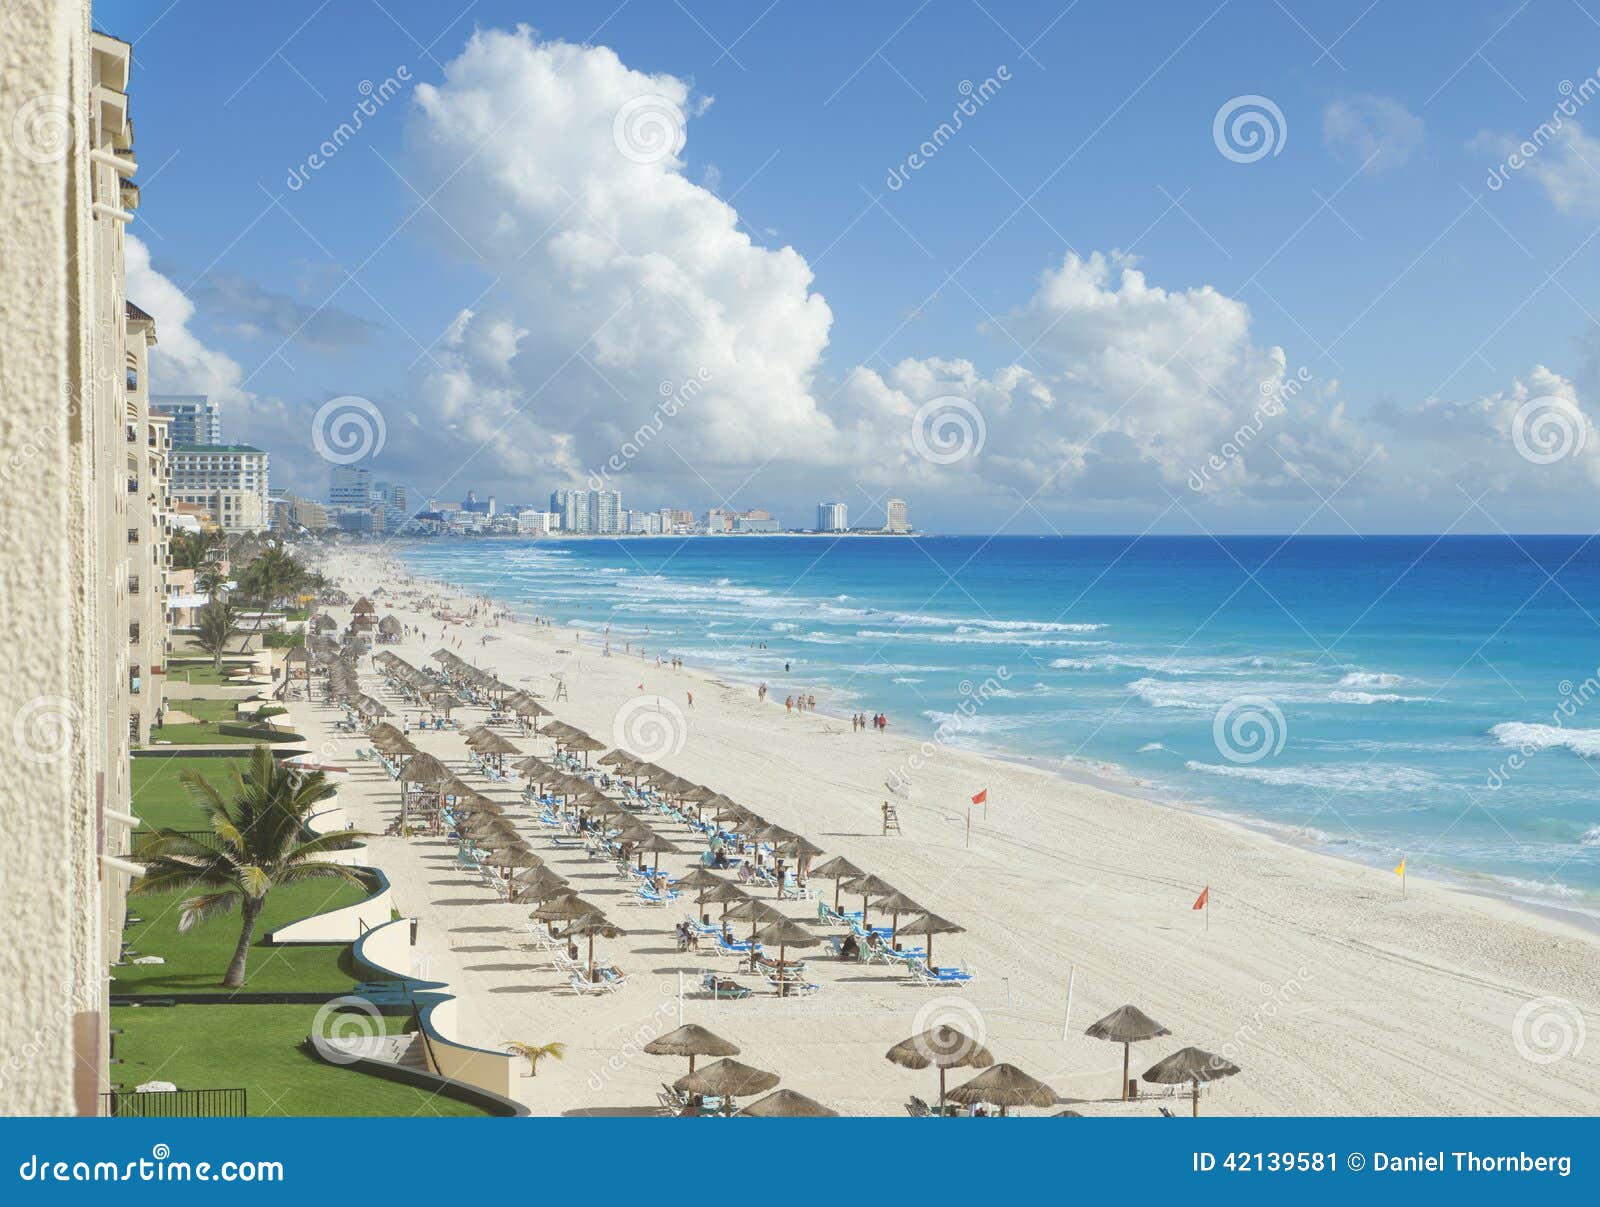 view of beach, caribbean sea and clouds in cancun, mexico